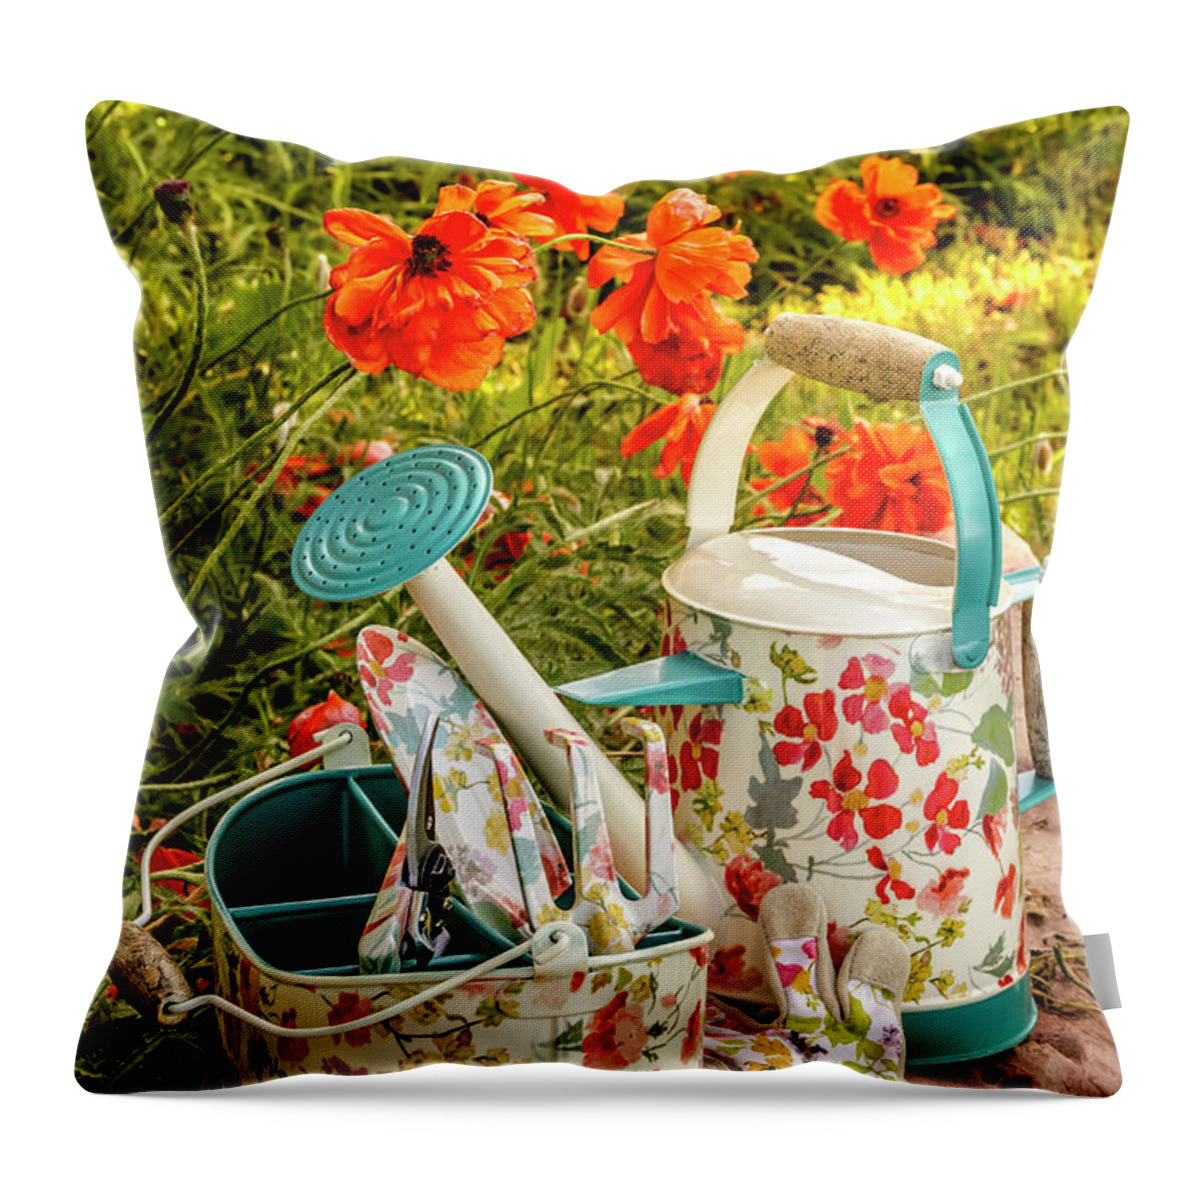 Beauty Throw Pillow featuring the photograph Hello Summer by Teri Virbickis